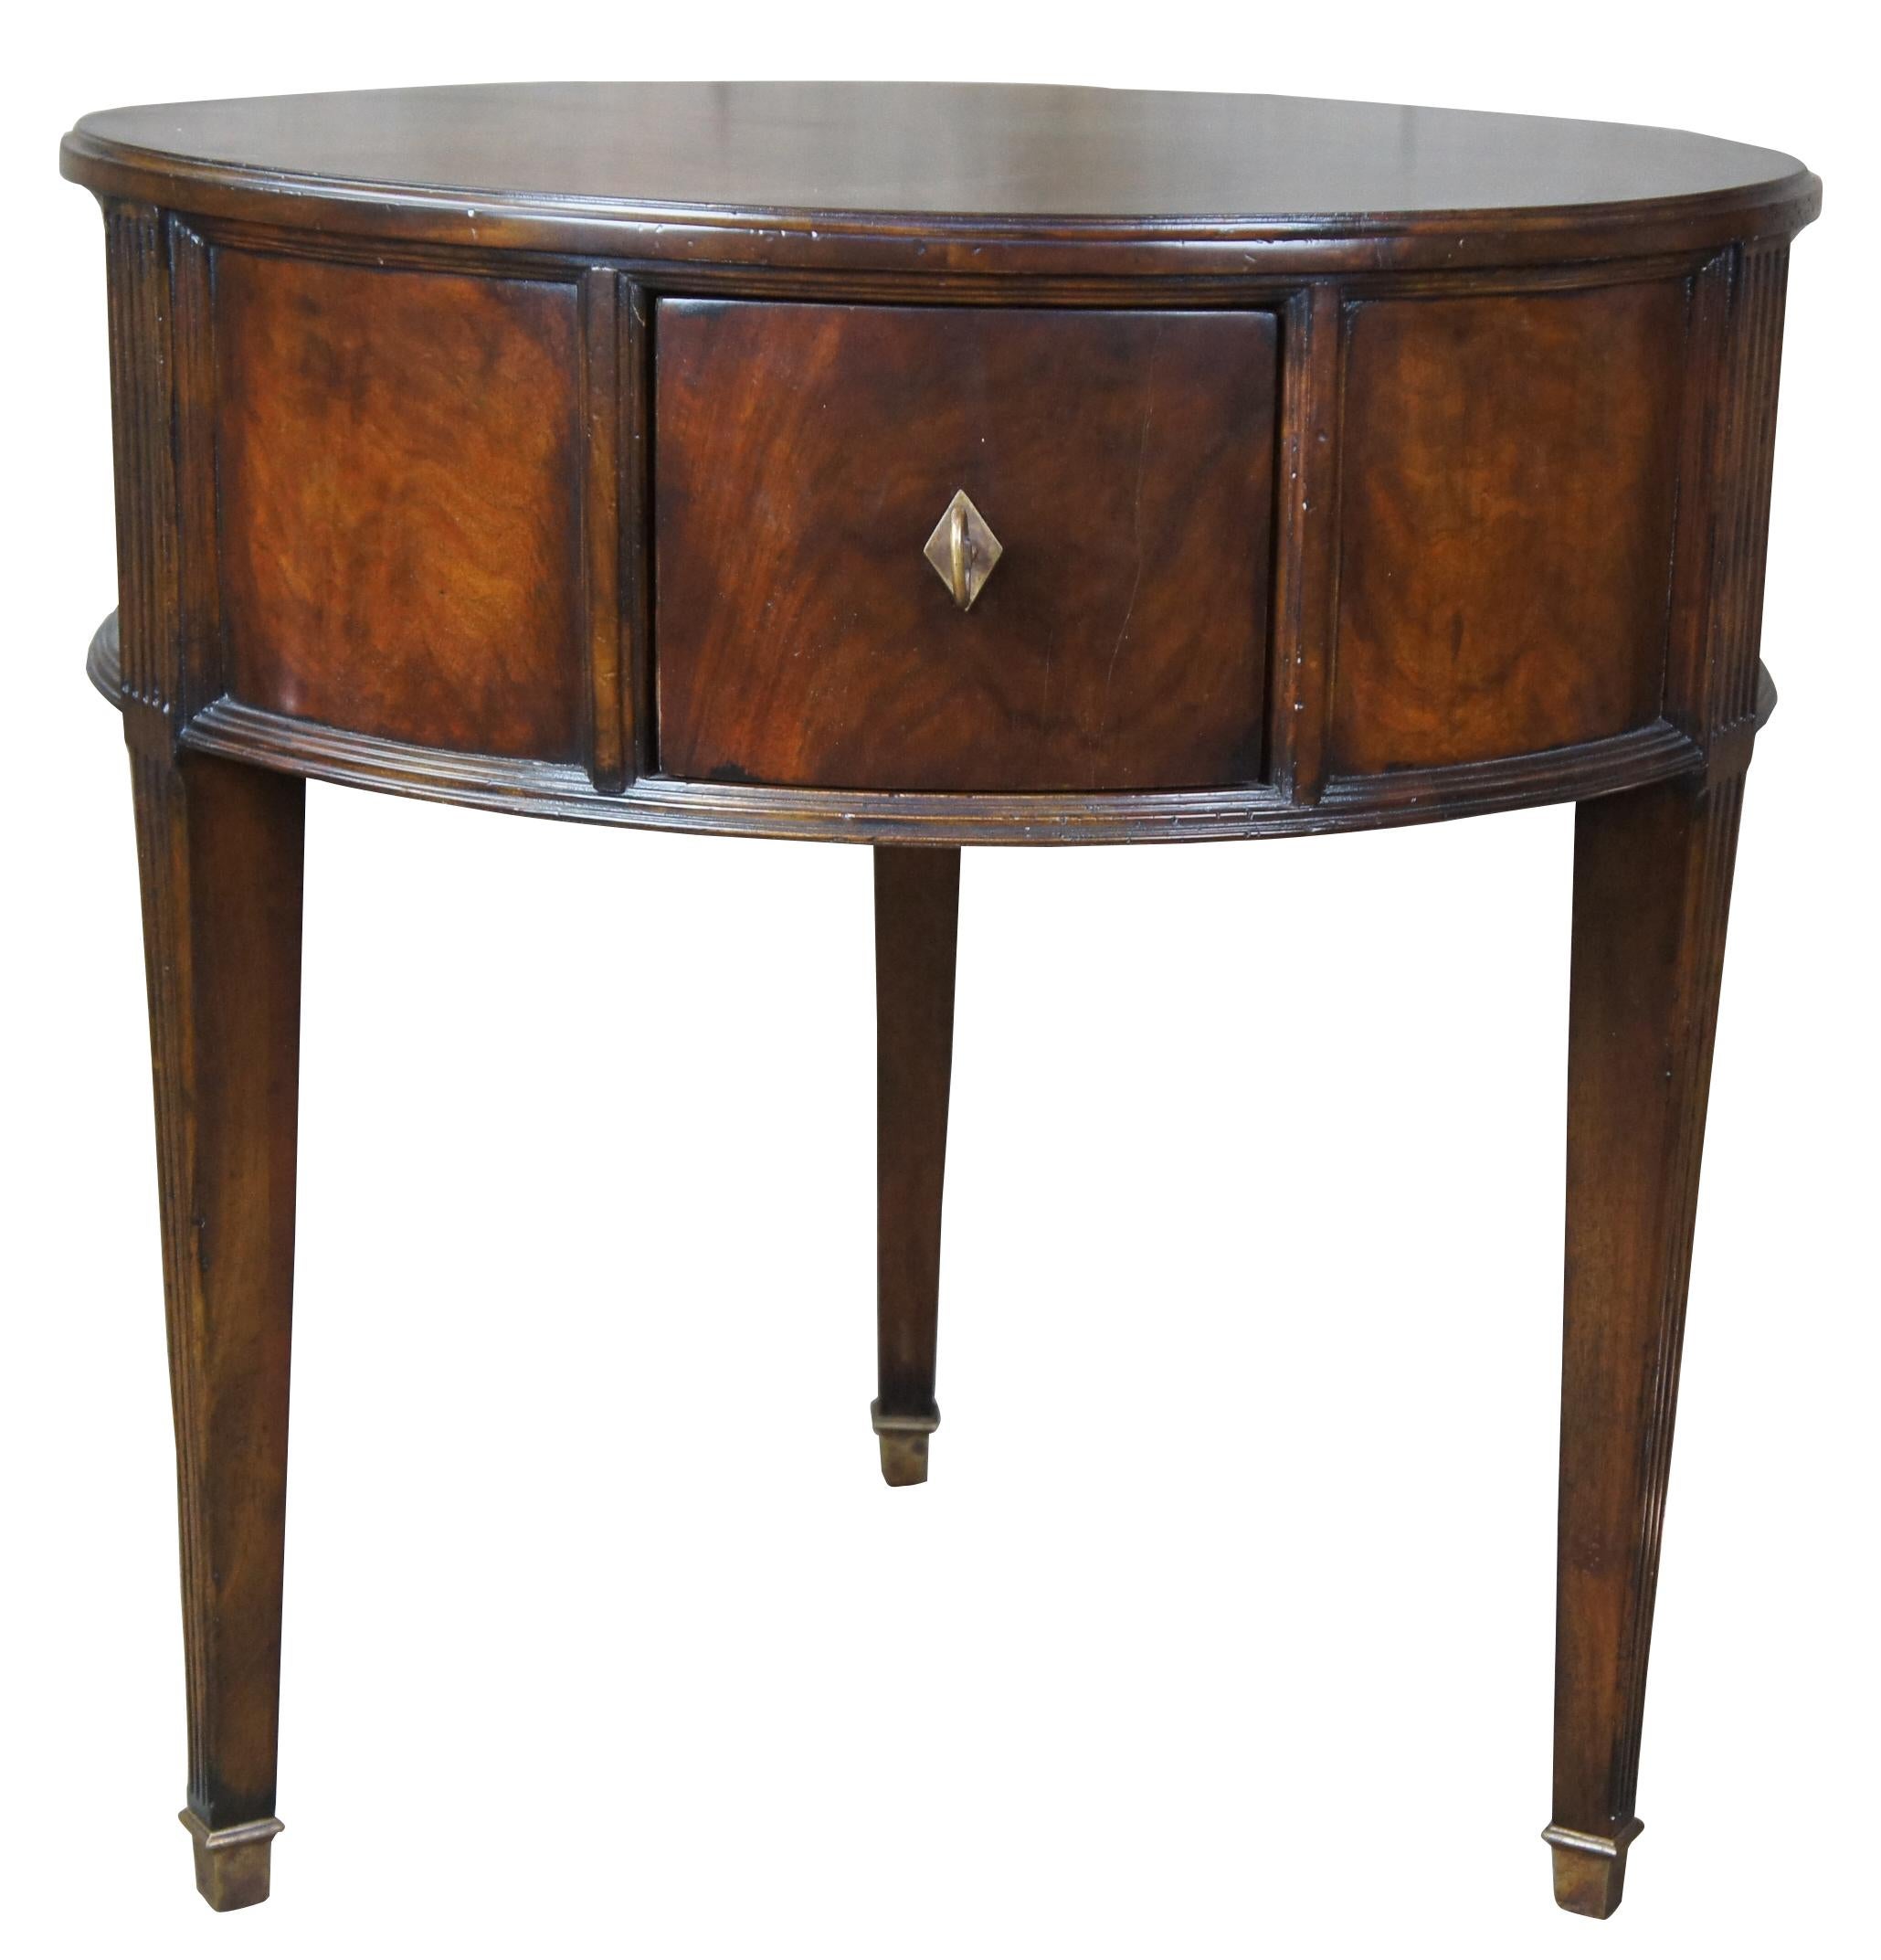 Henredon acquisitions flamed mahogany traditional round burnet drum side table

Traditional inspired drum table by Henredon.  The Burnet side table is from the Acquisitions Collection.  Flamed mahogany with 3 drawers,  tapered and fluted legs over